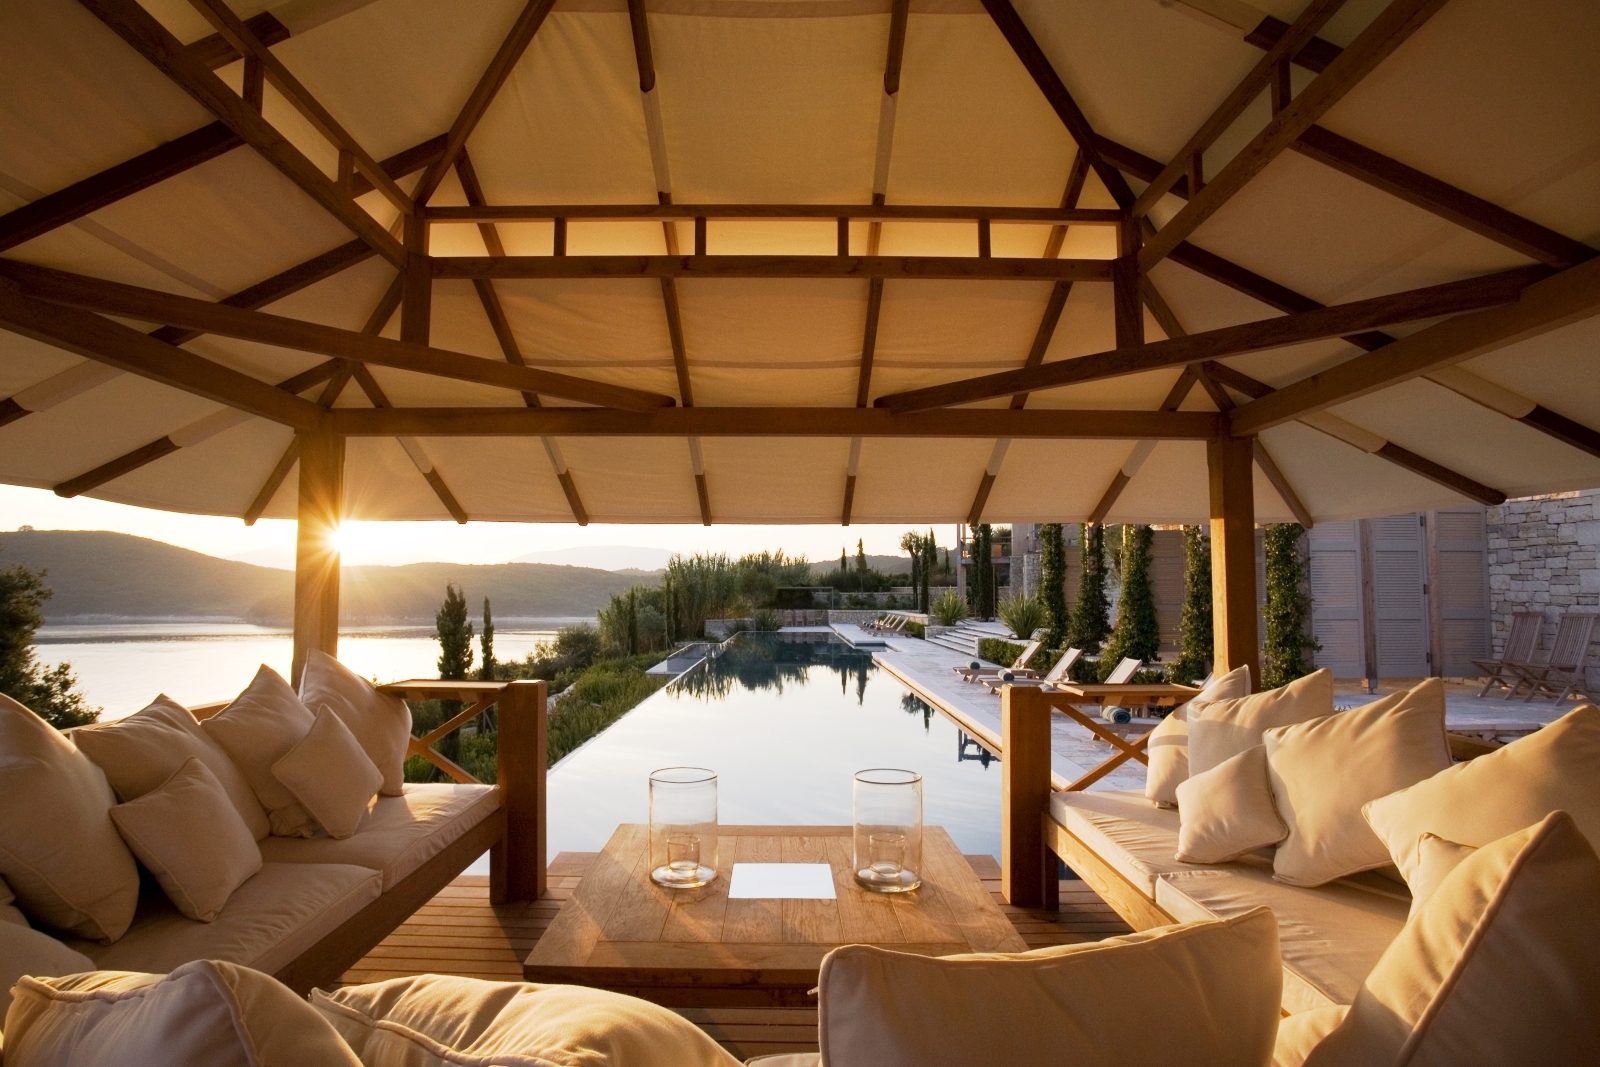 Lounge area by pool with sofas, coffee table and view of sea, sun loungers and patio at Villa Penelope on Corfu, Greece 